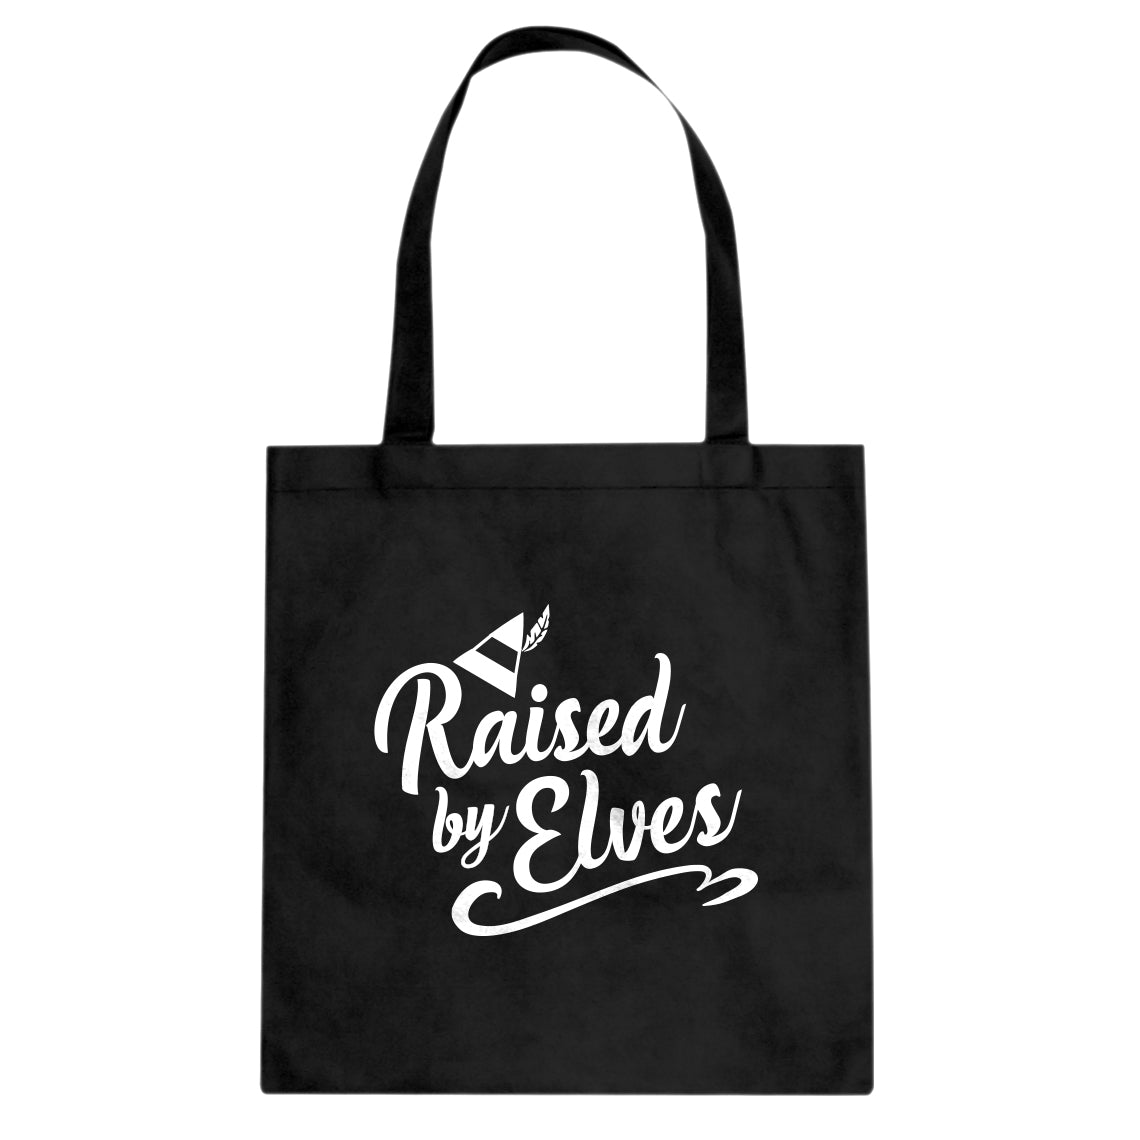 Raised by Elves Cotton Canvas Tote Bag